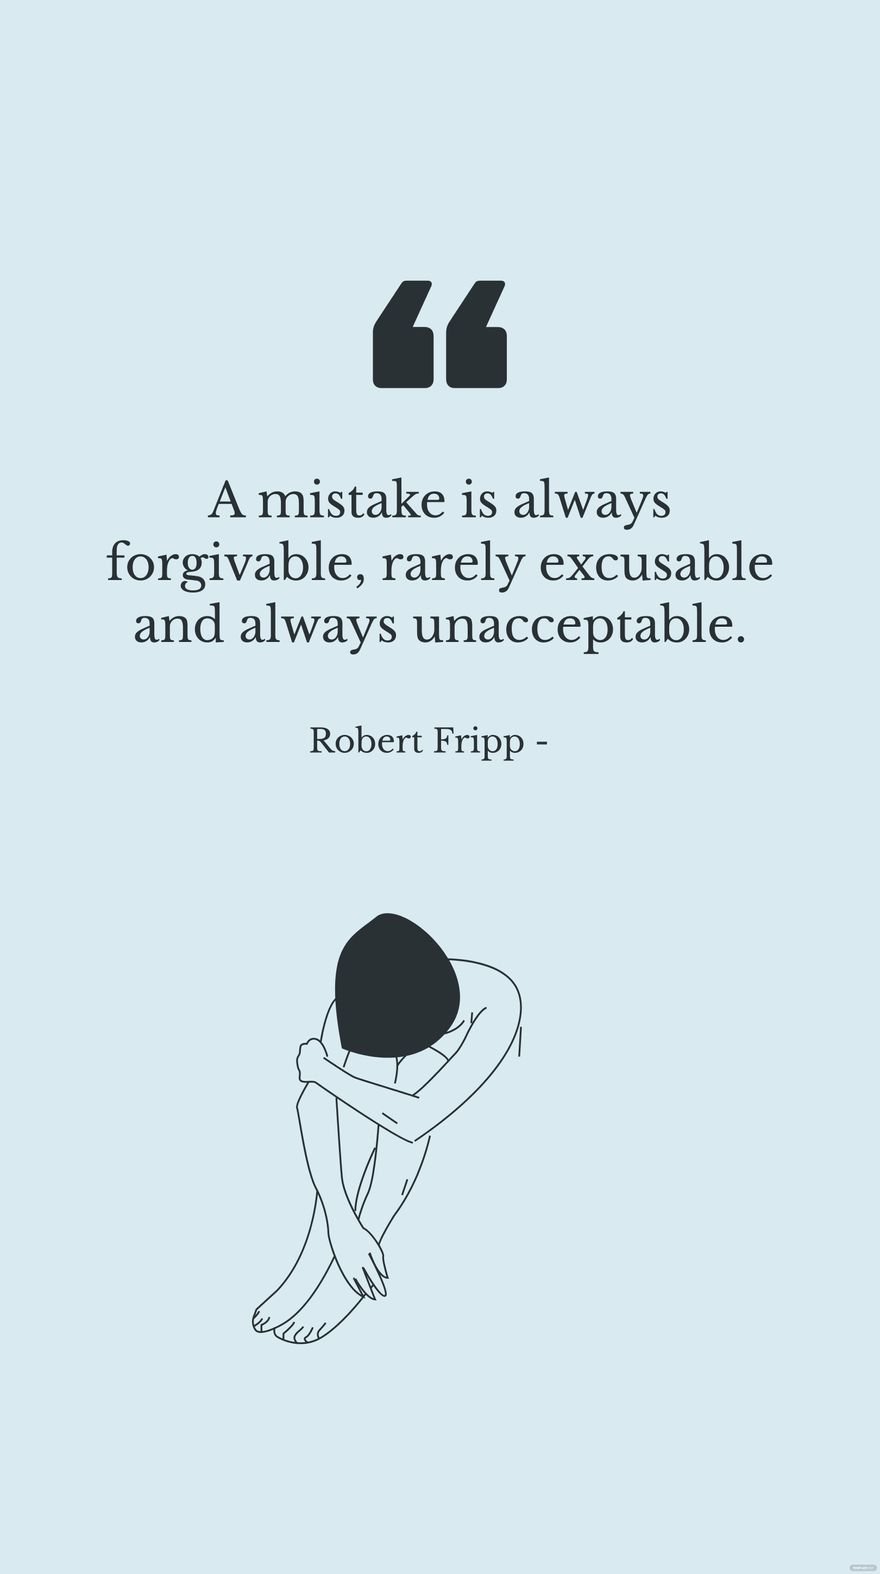 Robert Fripp - A mistake is always forgivable, rarely excusable and always unacceptable.